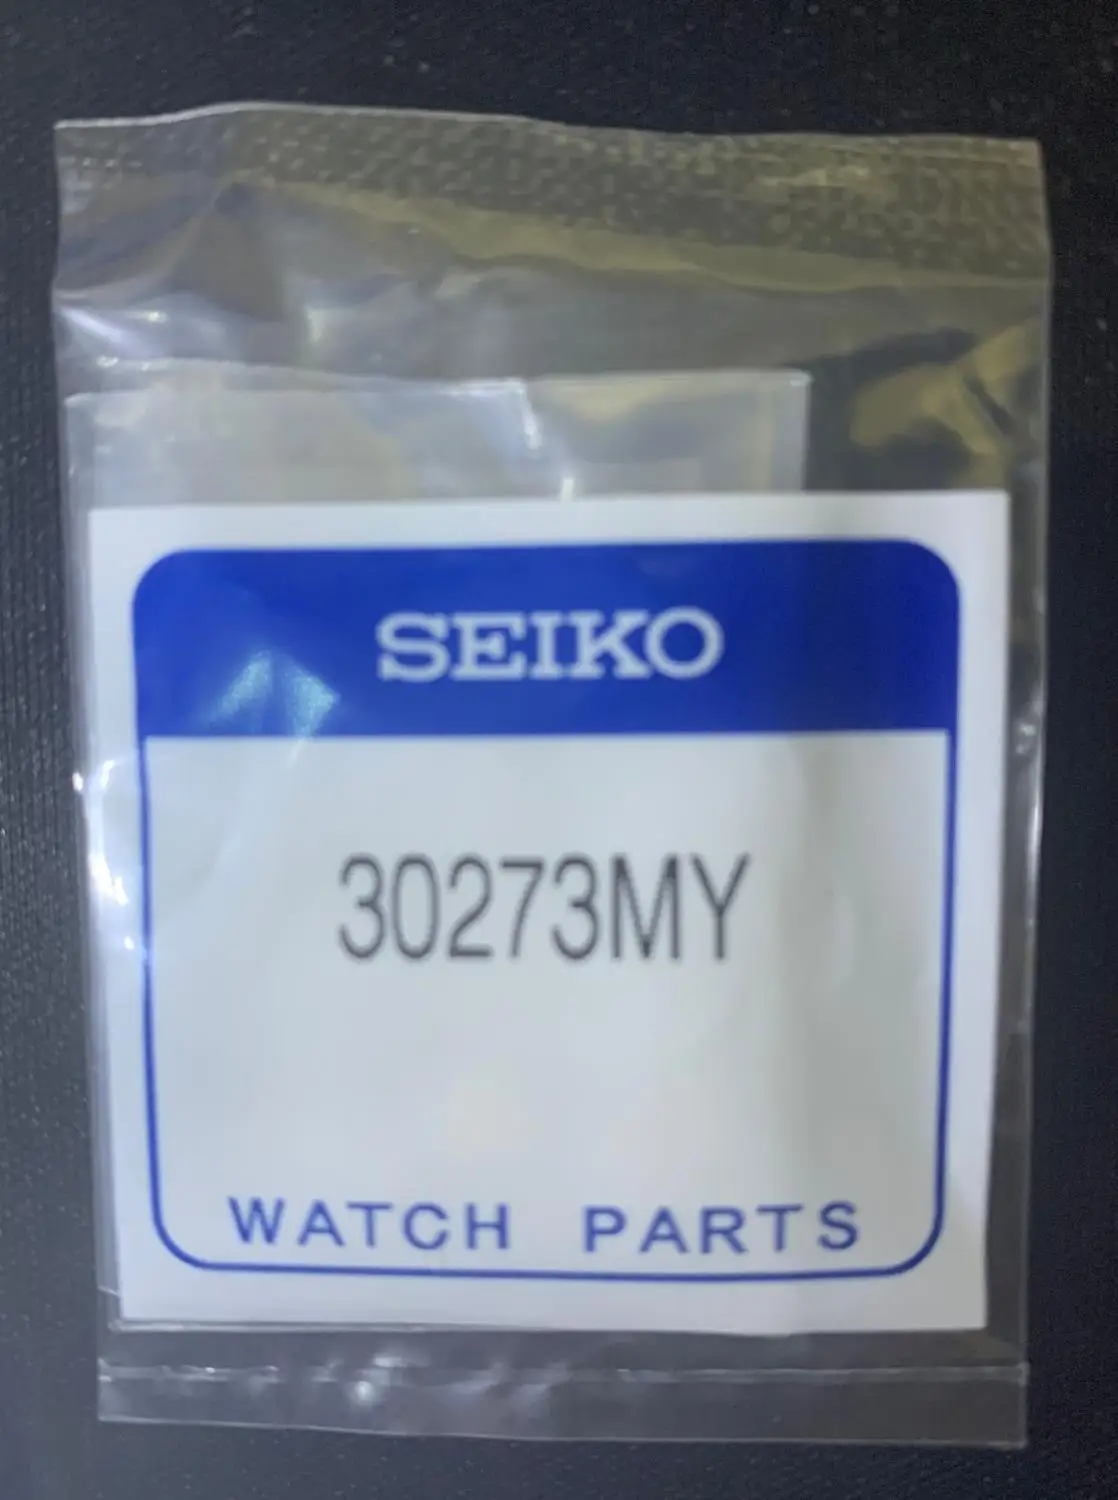 3027-3MZ MT616 30273MZ 30273MY 3027-3MY Seiko watch dedicated artificial  kinetic energy rechargeable battery - AliExpress